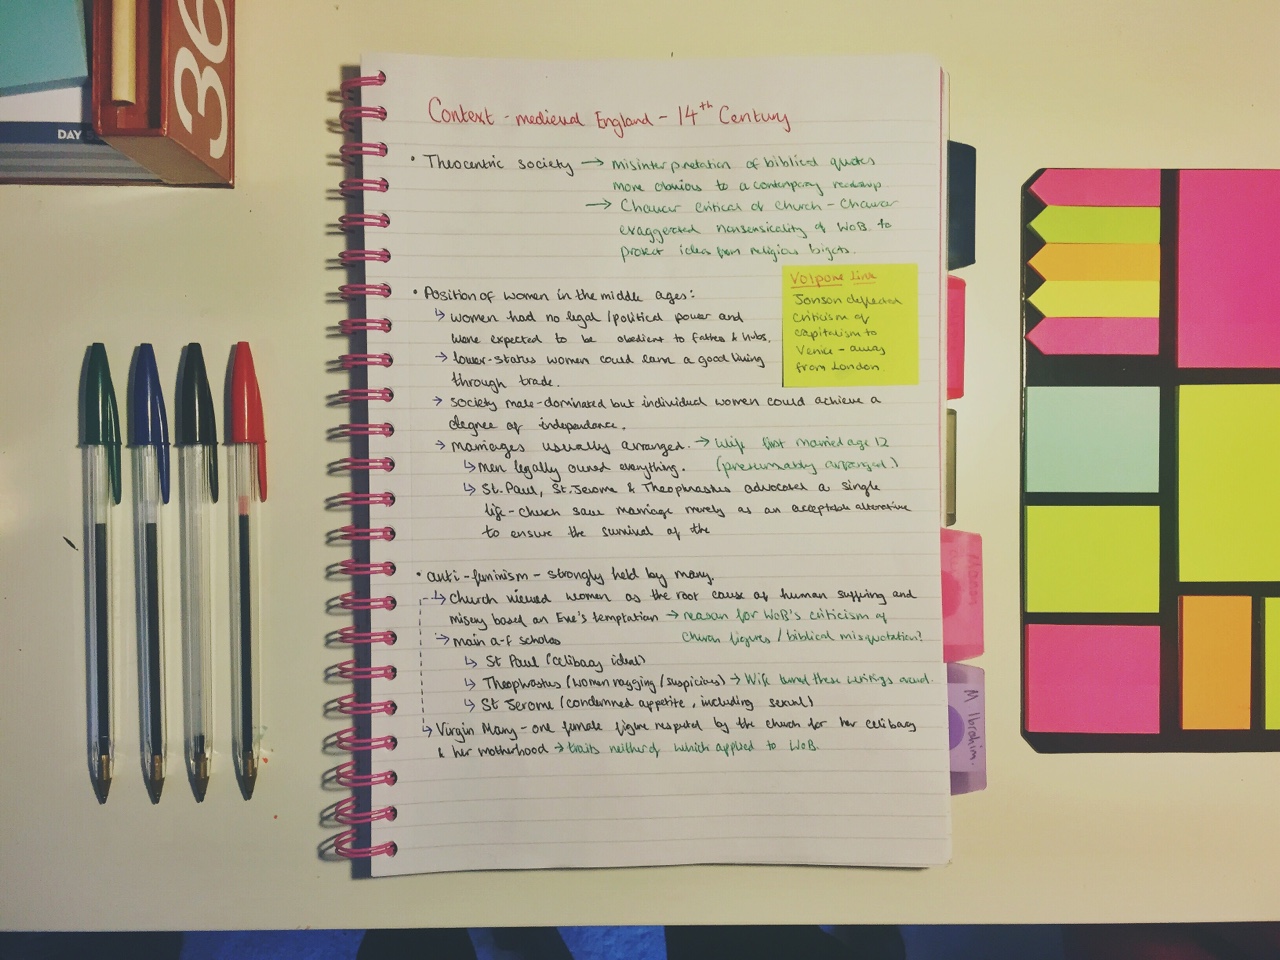 Successful Students Series, Post #3: Bringing Notes to to be Edited and Highlighted - Shumsky